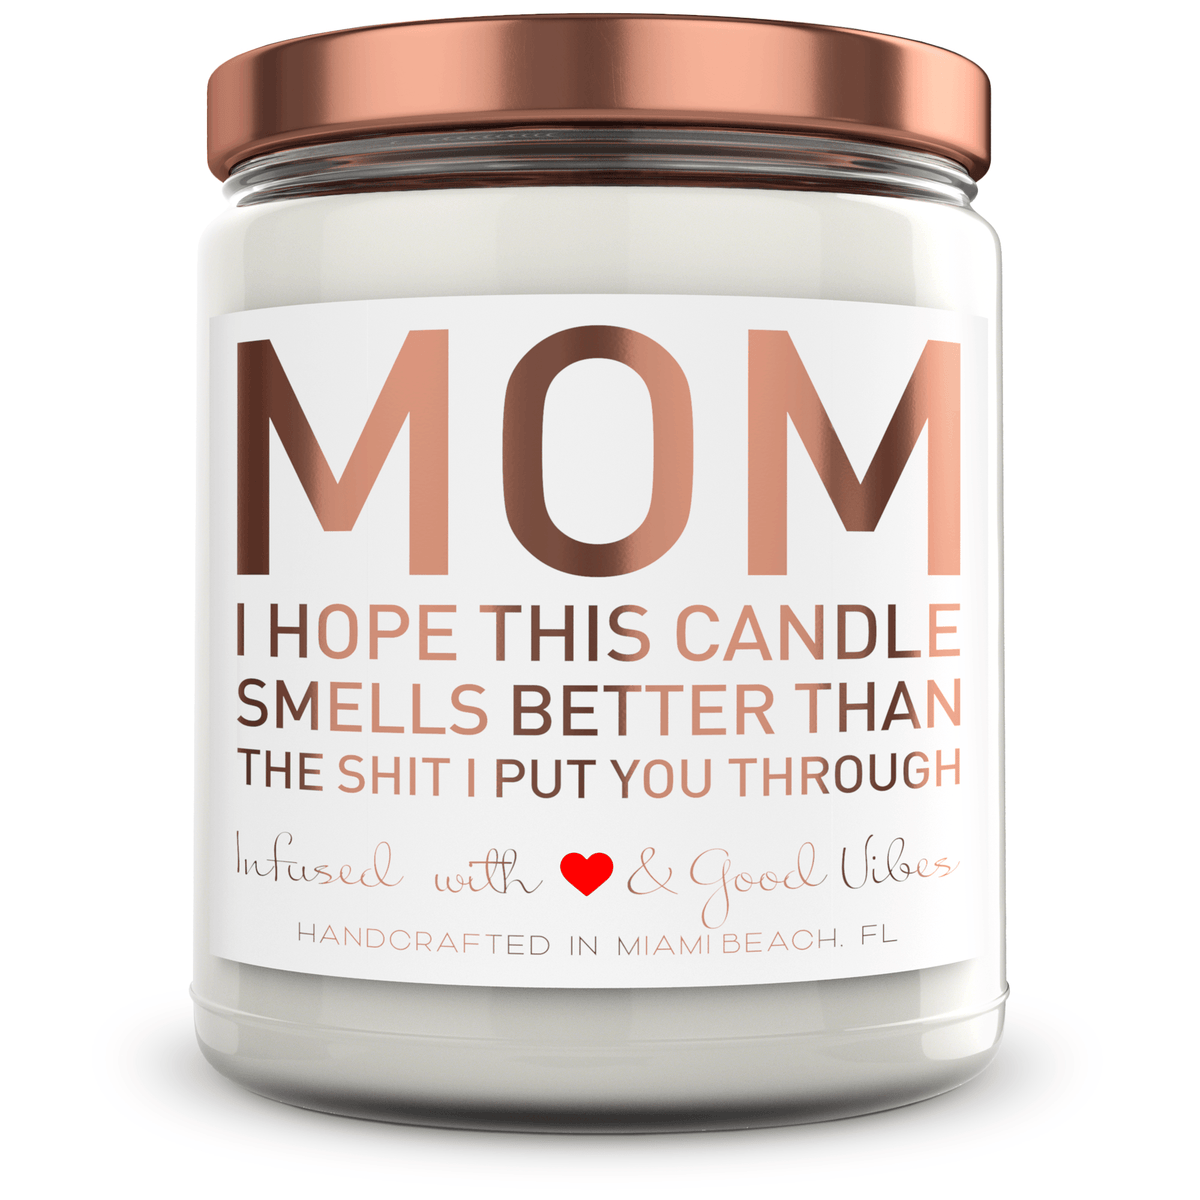 Mom, I hope this candle smells better than the Shit I put you through - Mint Sugar Candle